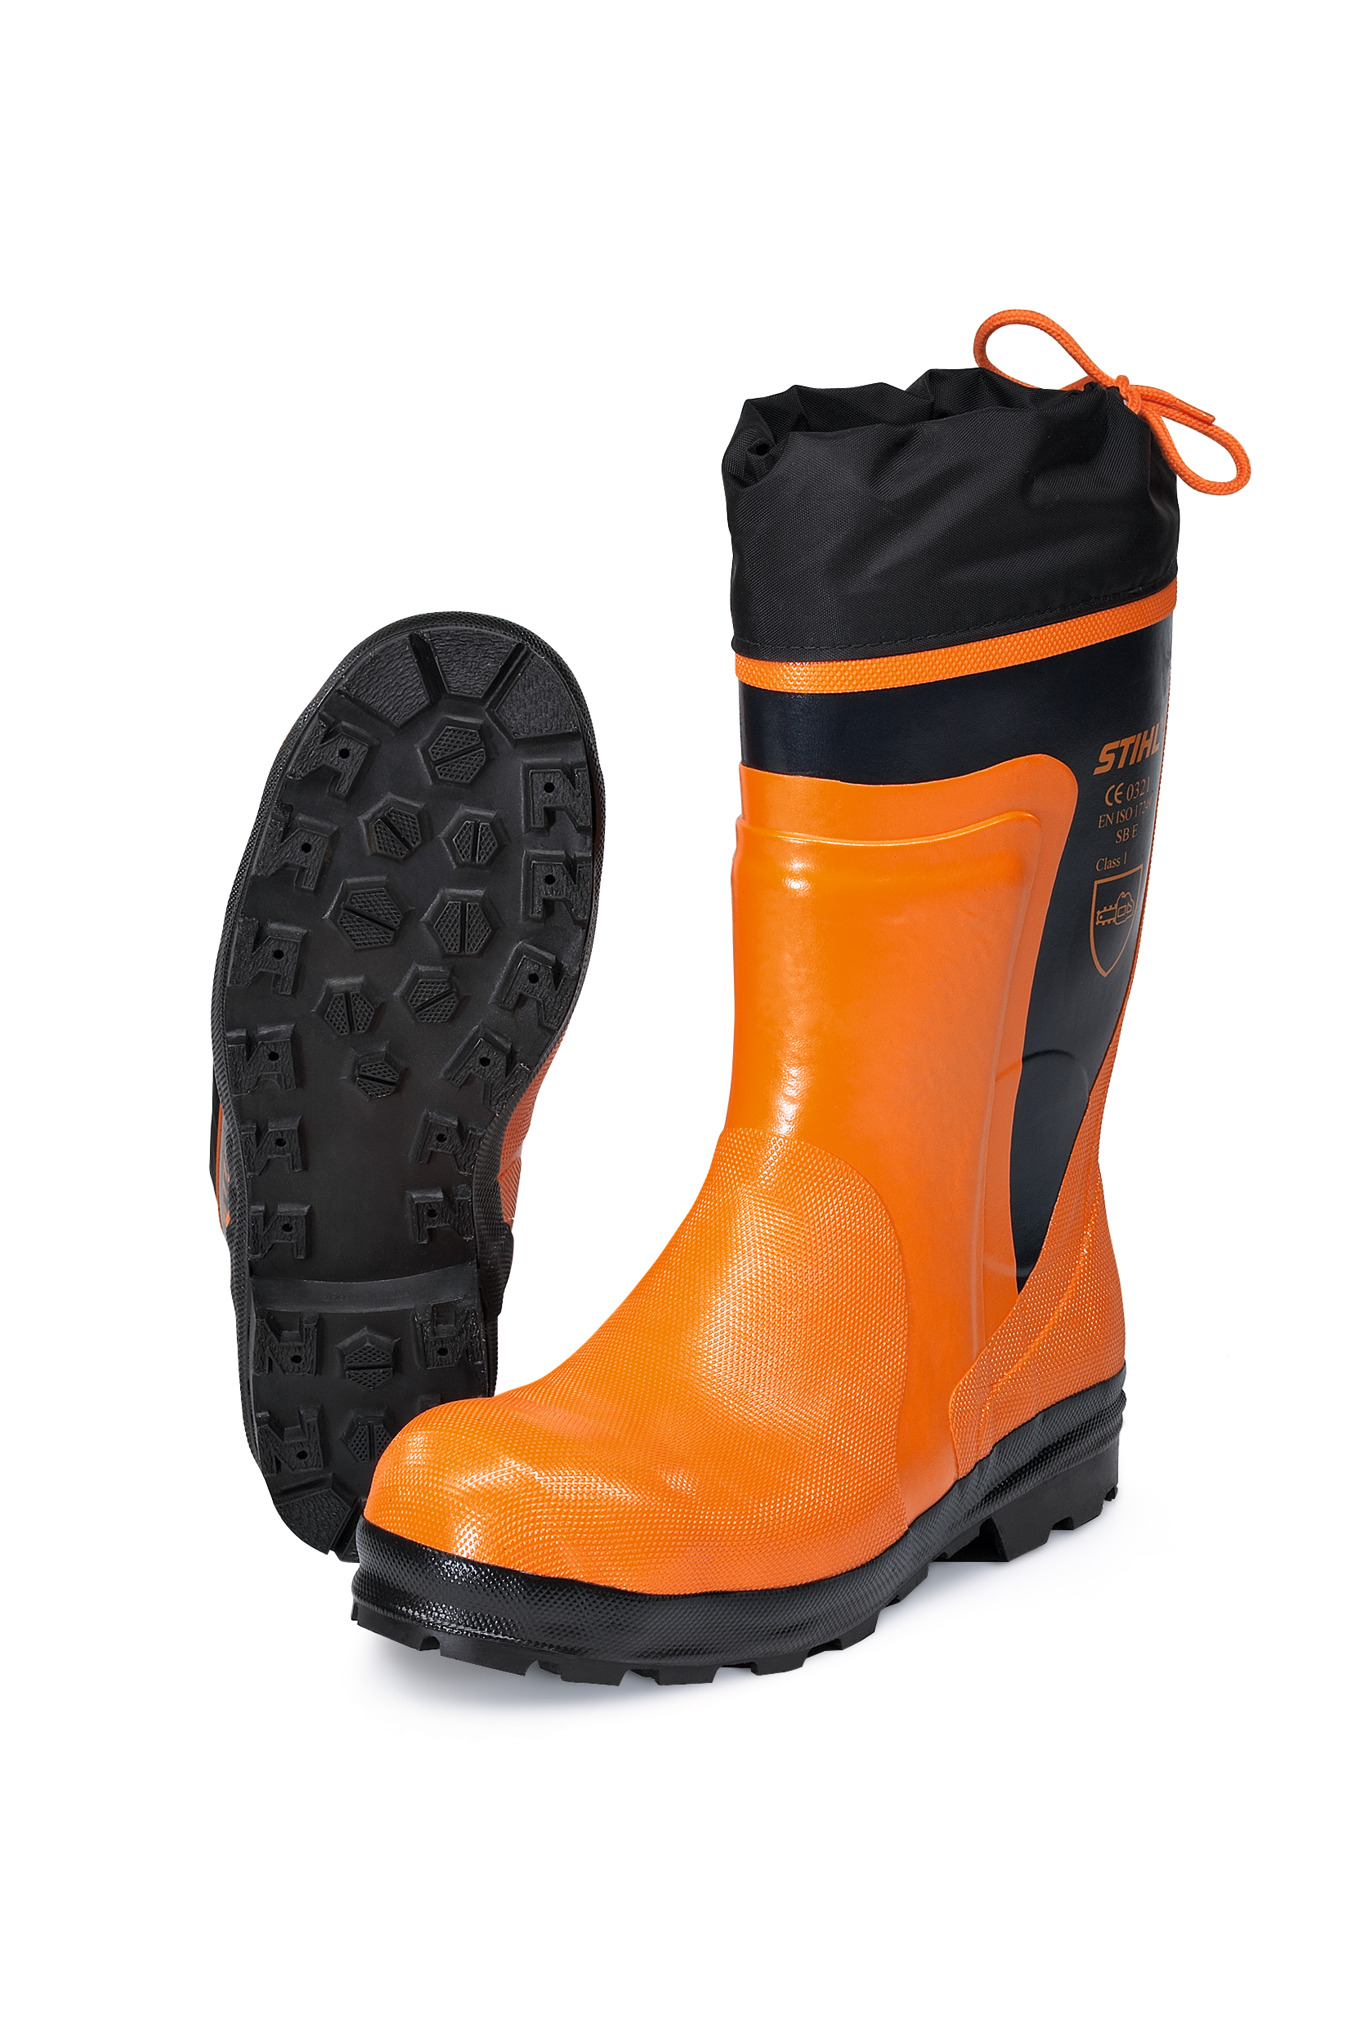 STANDARD chain saw rubber boots